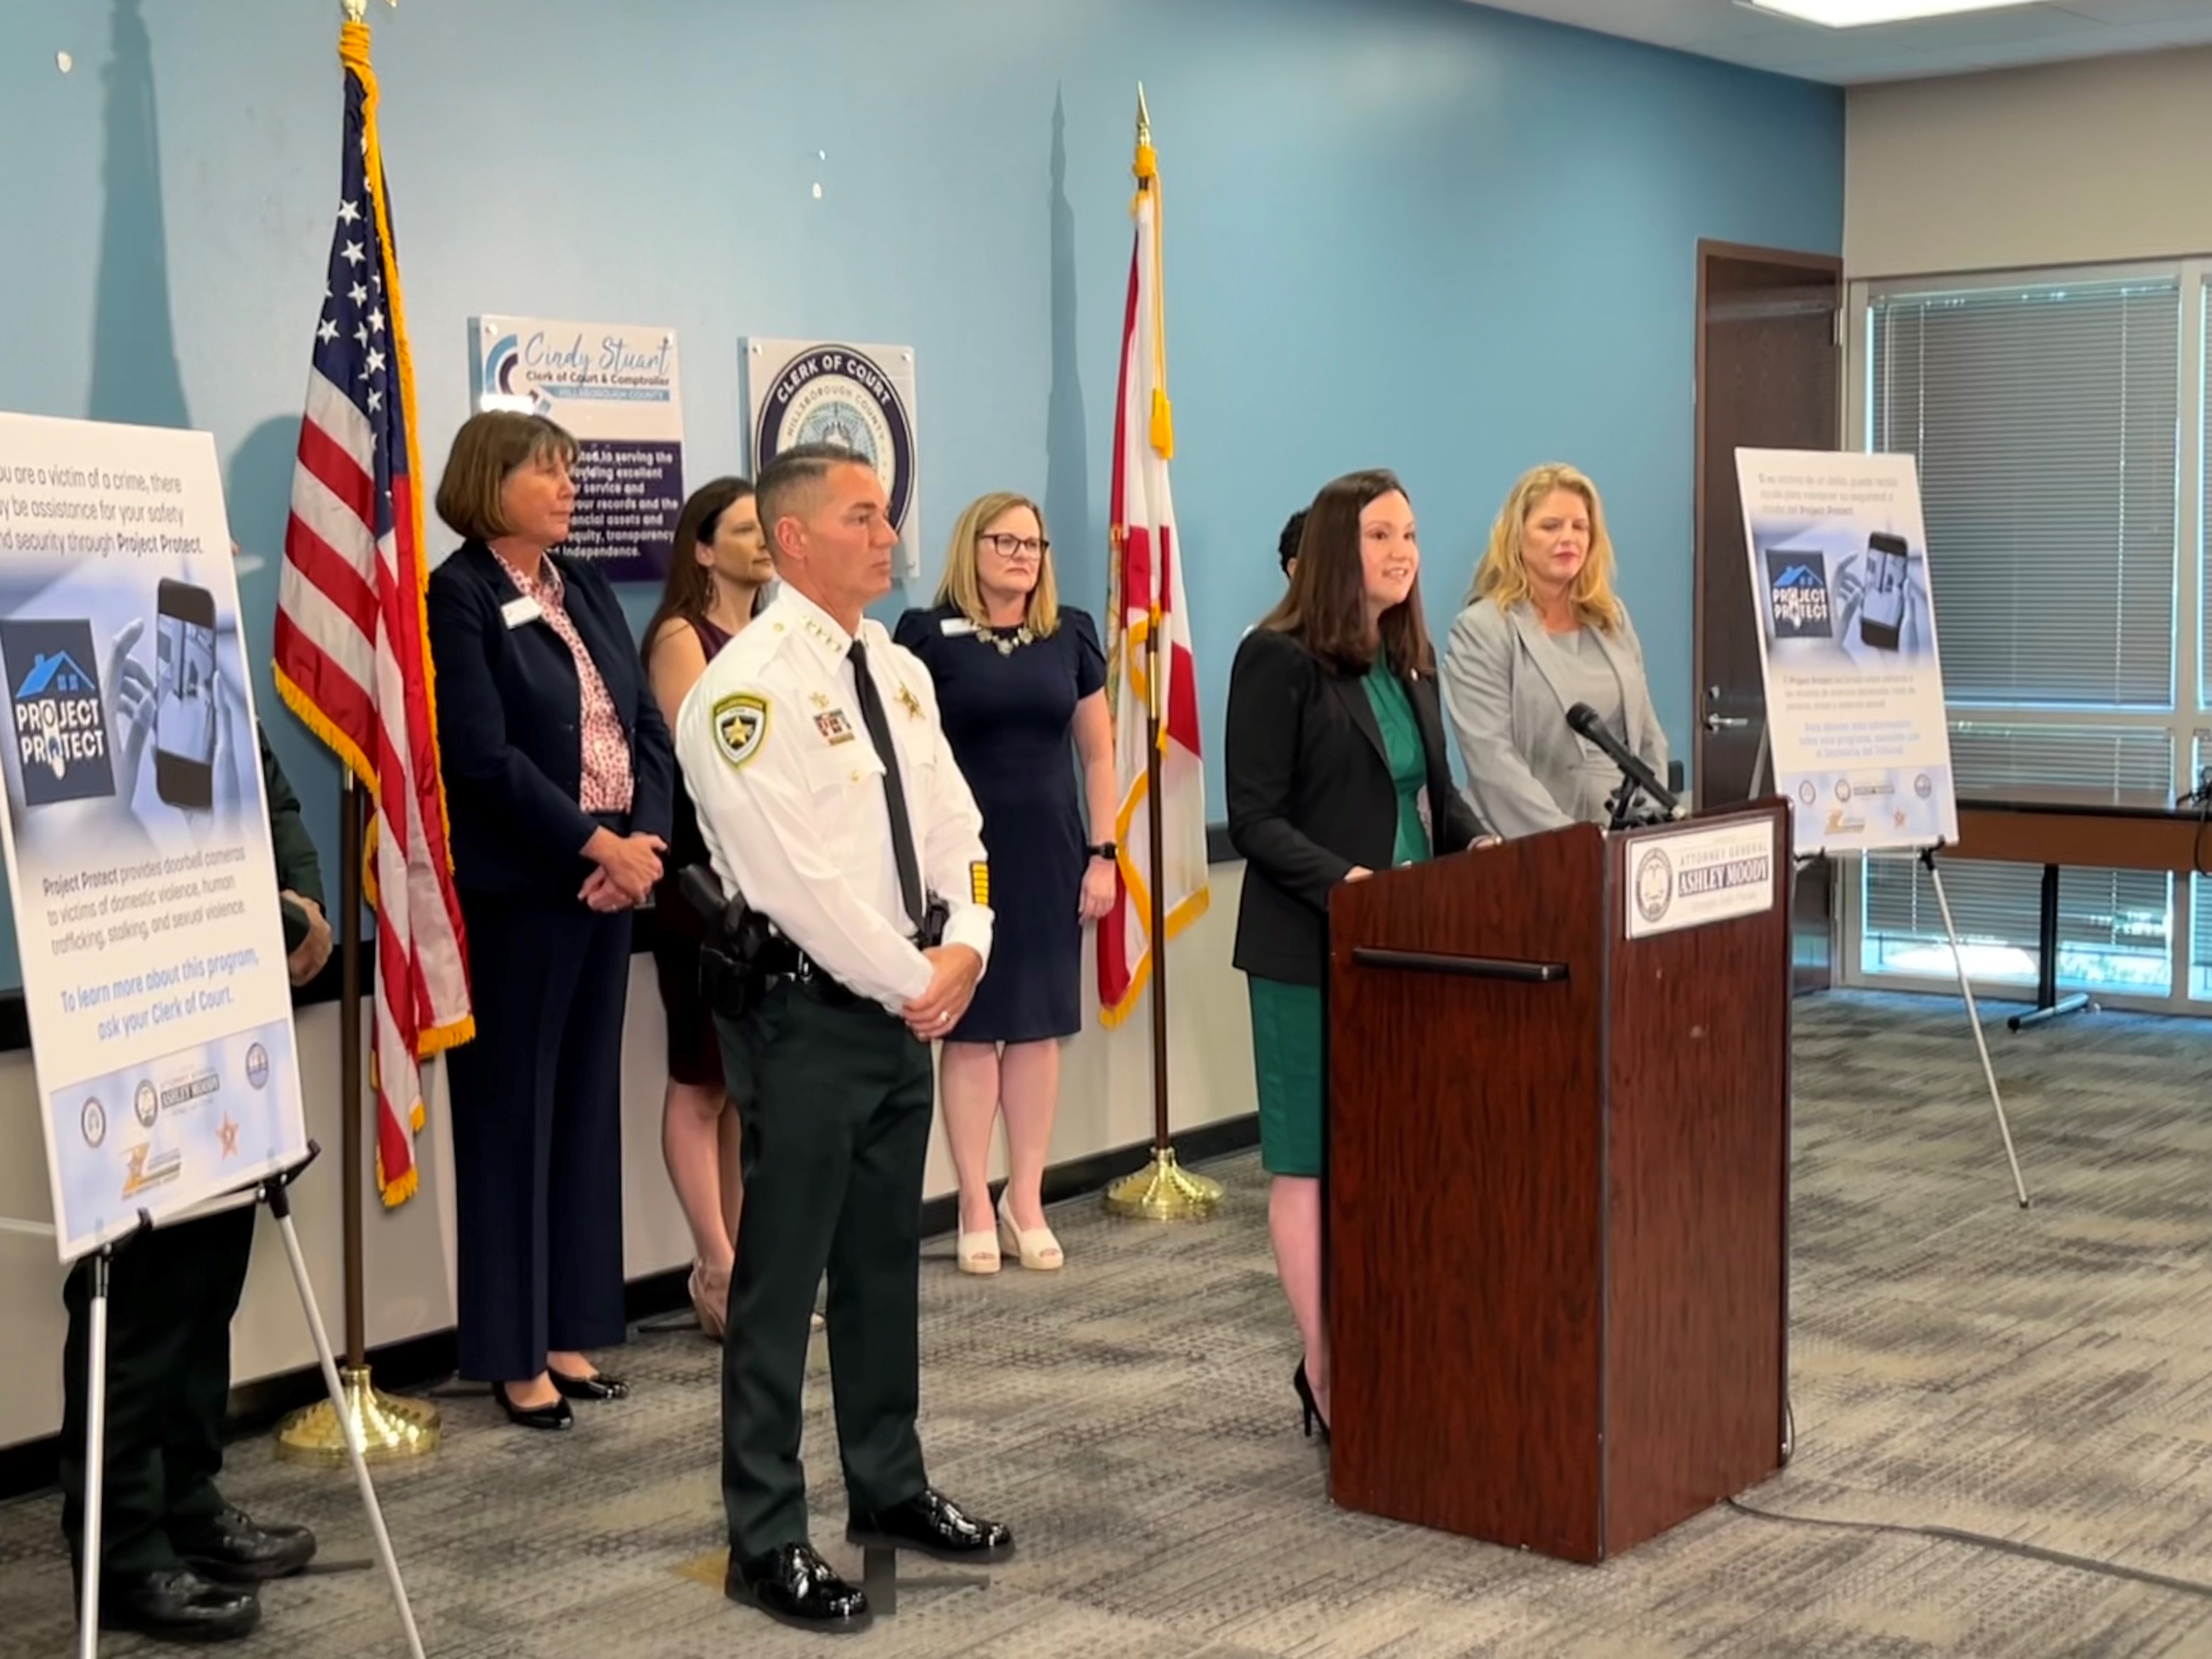 Local leaders announcing the launch of Project Protect